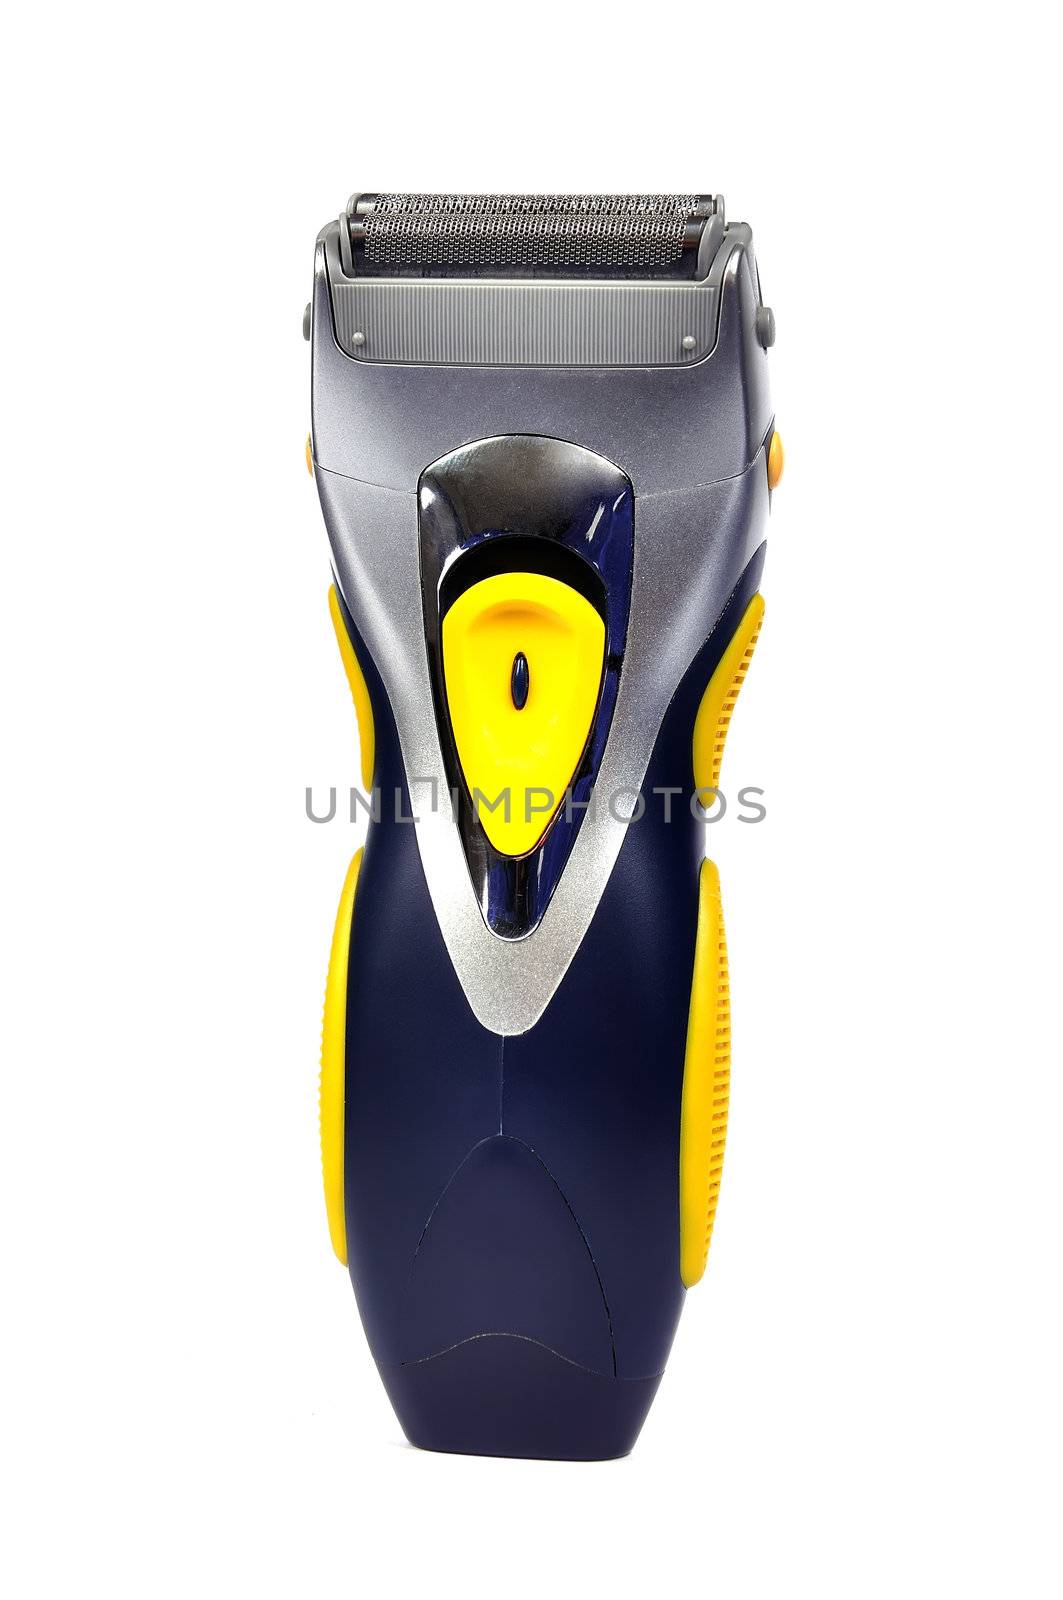 portable electric shaver on white background